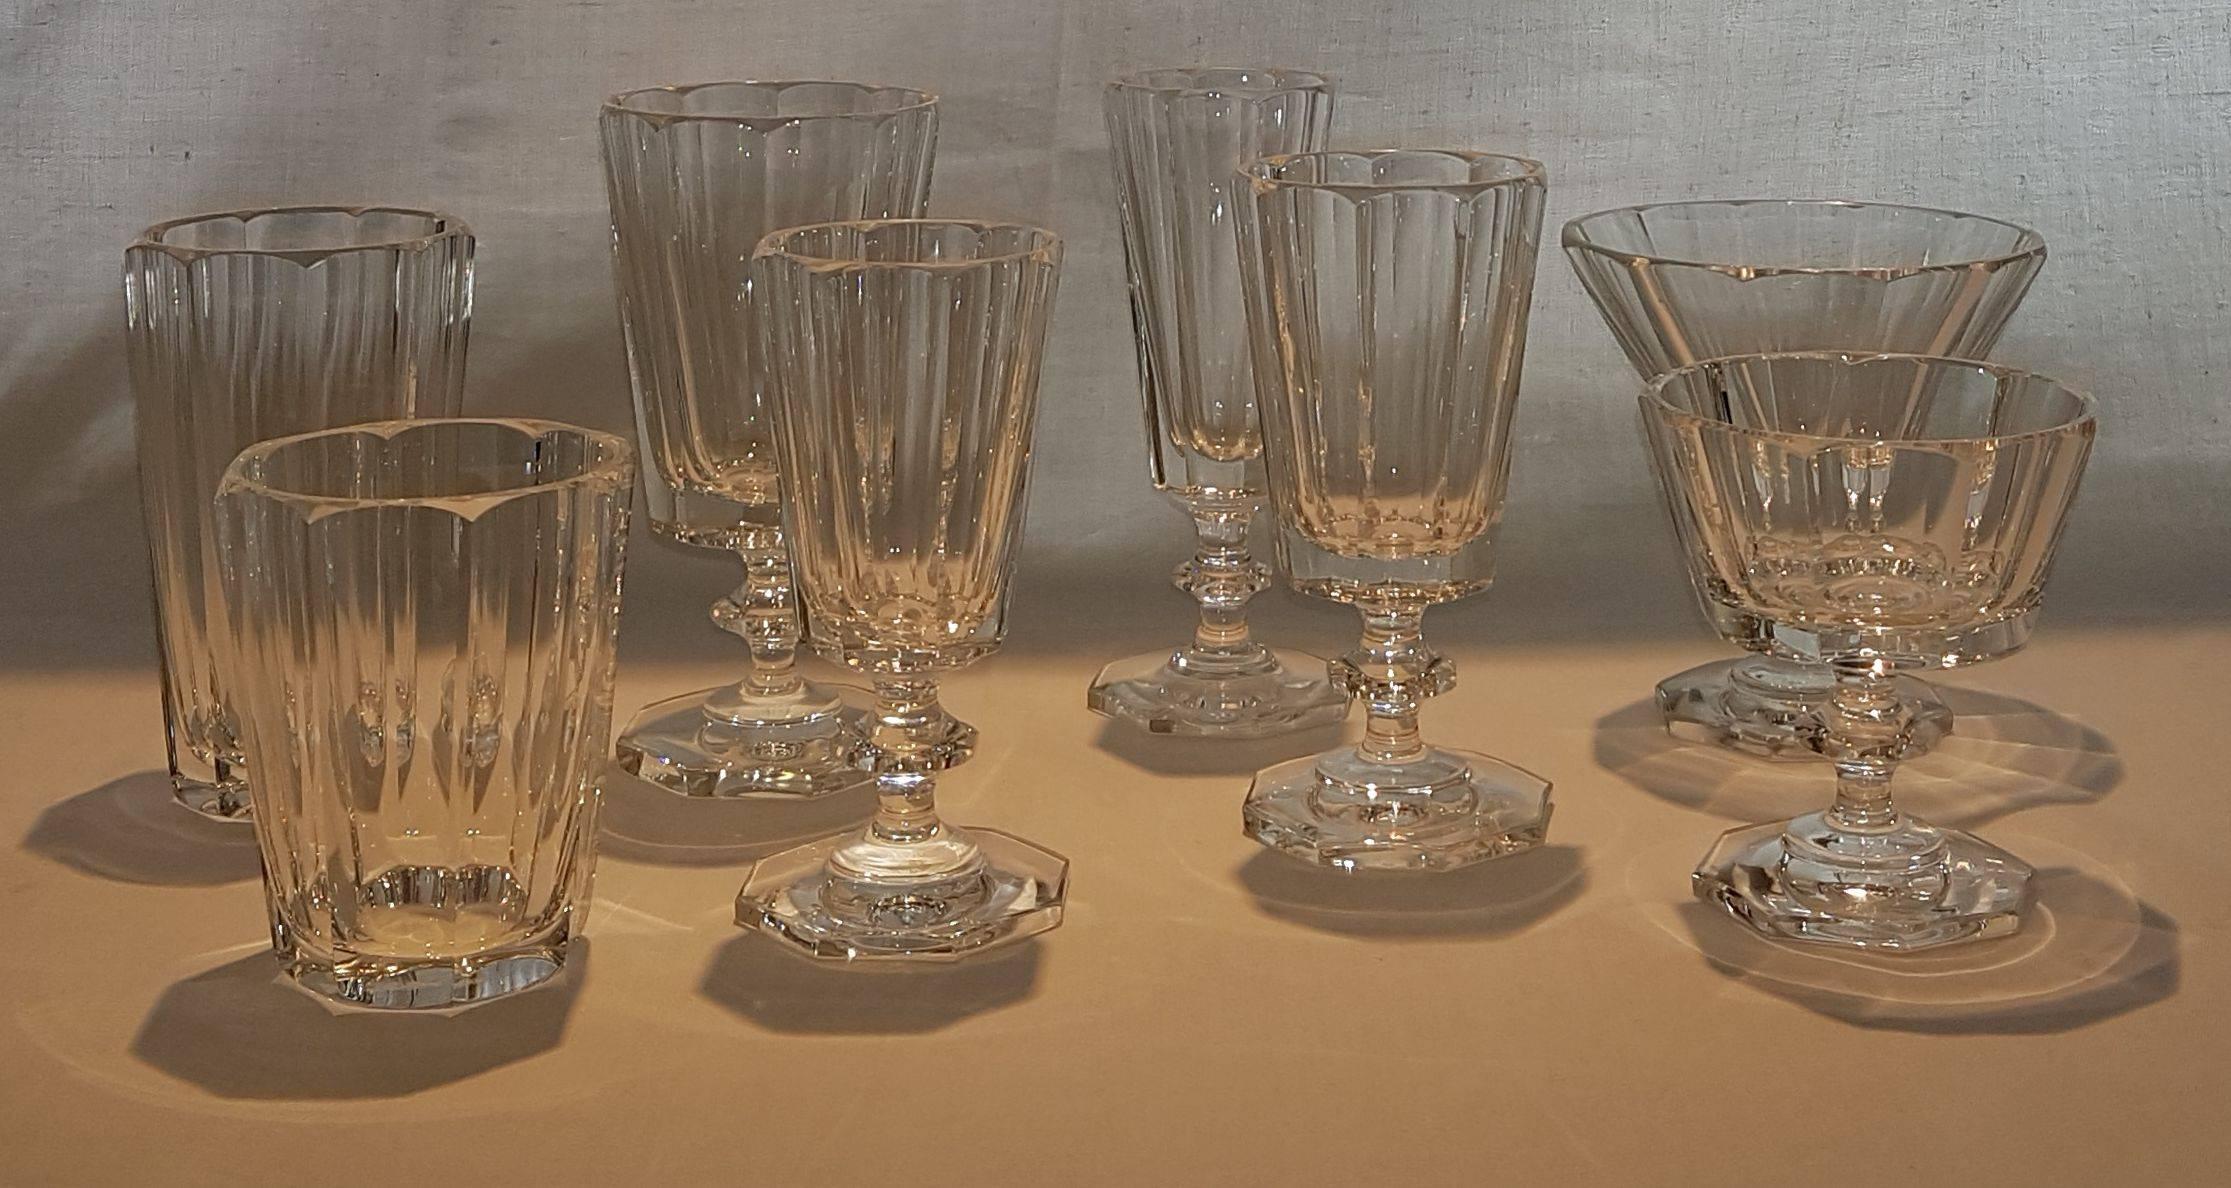 Mouth blown hand-cut crystal glass goblets made in Germany: solid, noble, elegant.
The “Biedermeier” inspired style, with beveled body, base and stem pearl,
gives them a timeless beauty. 
Rounded off edges for more comfortable drinking.
A highlight